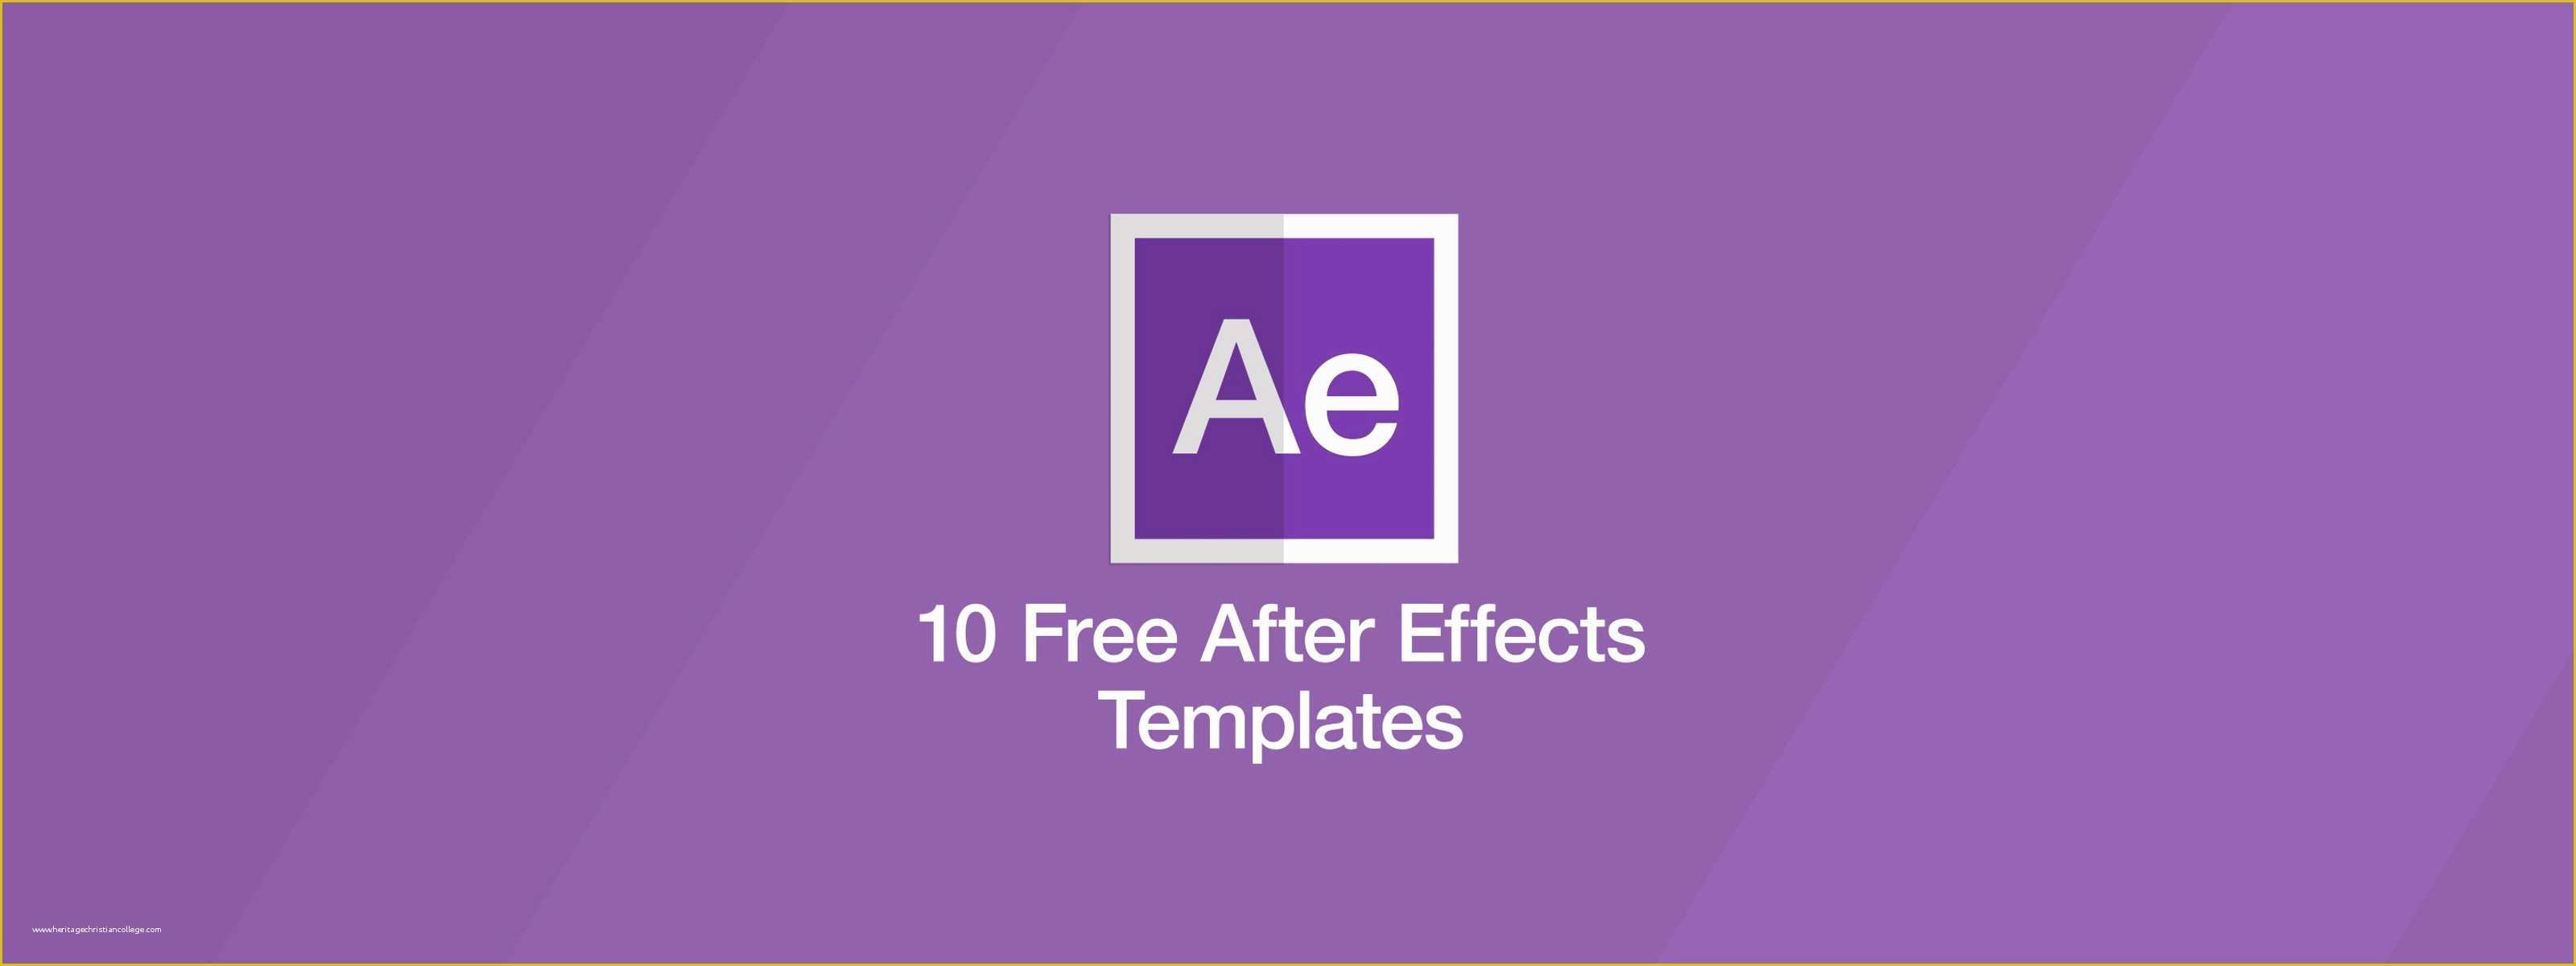 Free Video Templates after Effects Of 10 Free after Effects Templates